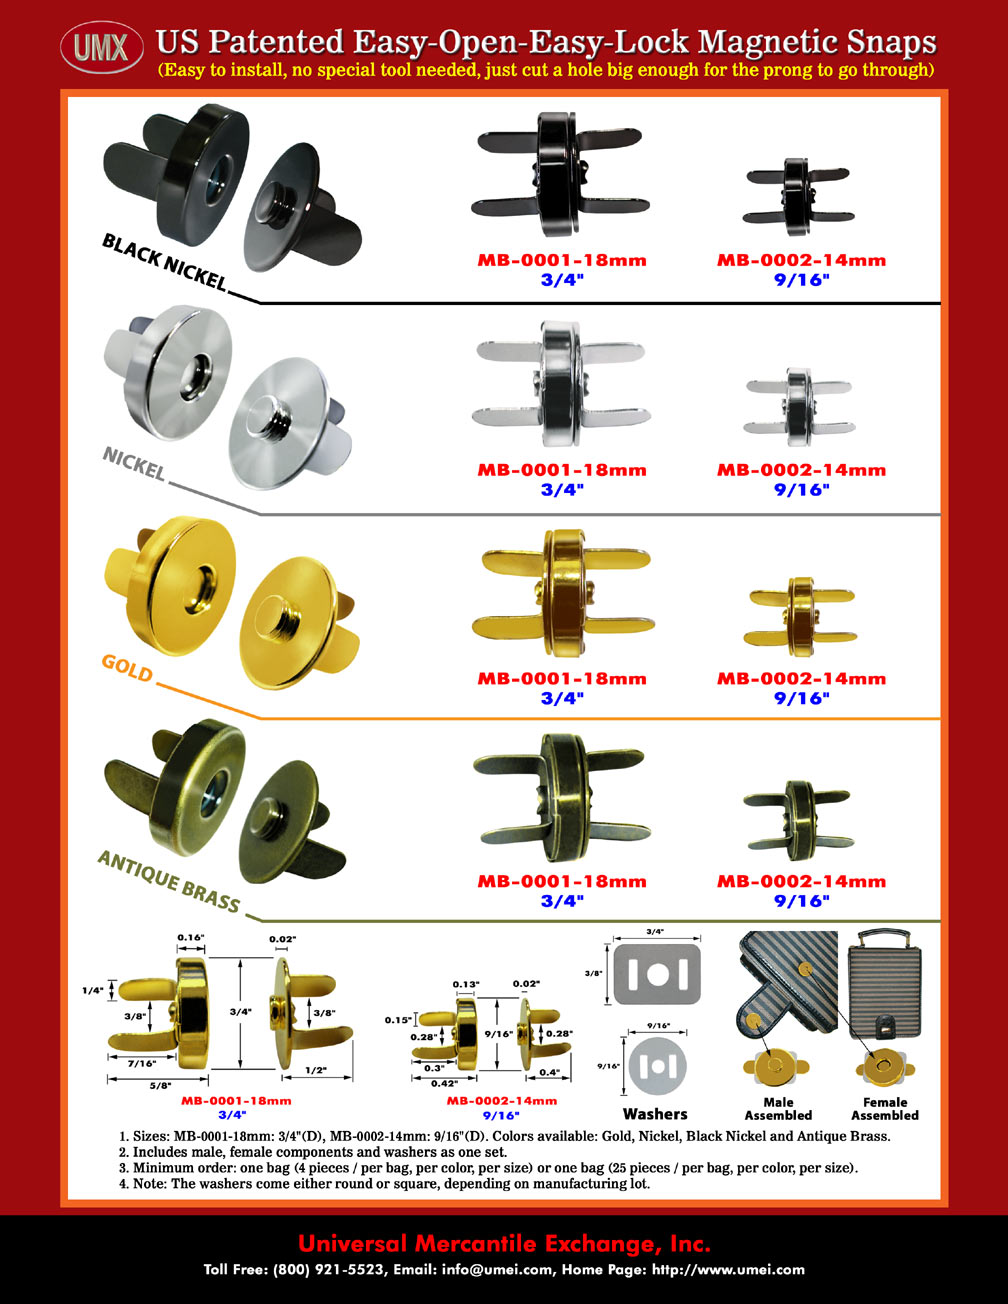 UMX Catalogue - US Patented Easy-Open-Easy-Lock
Magnetic Snaps